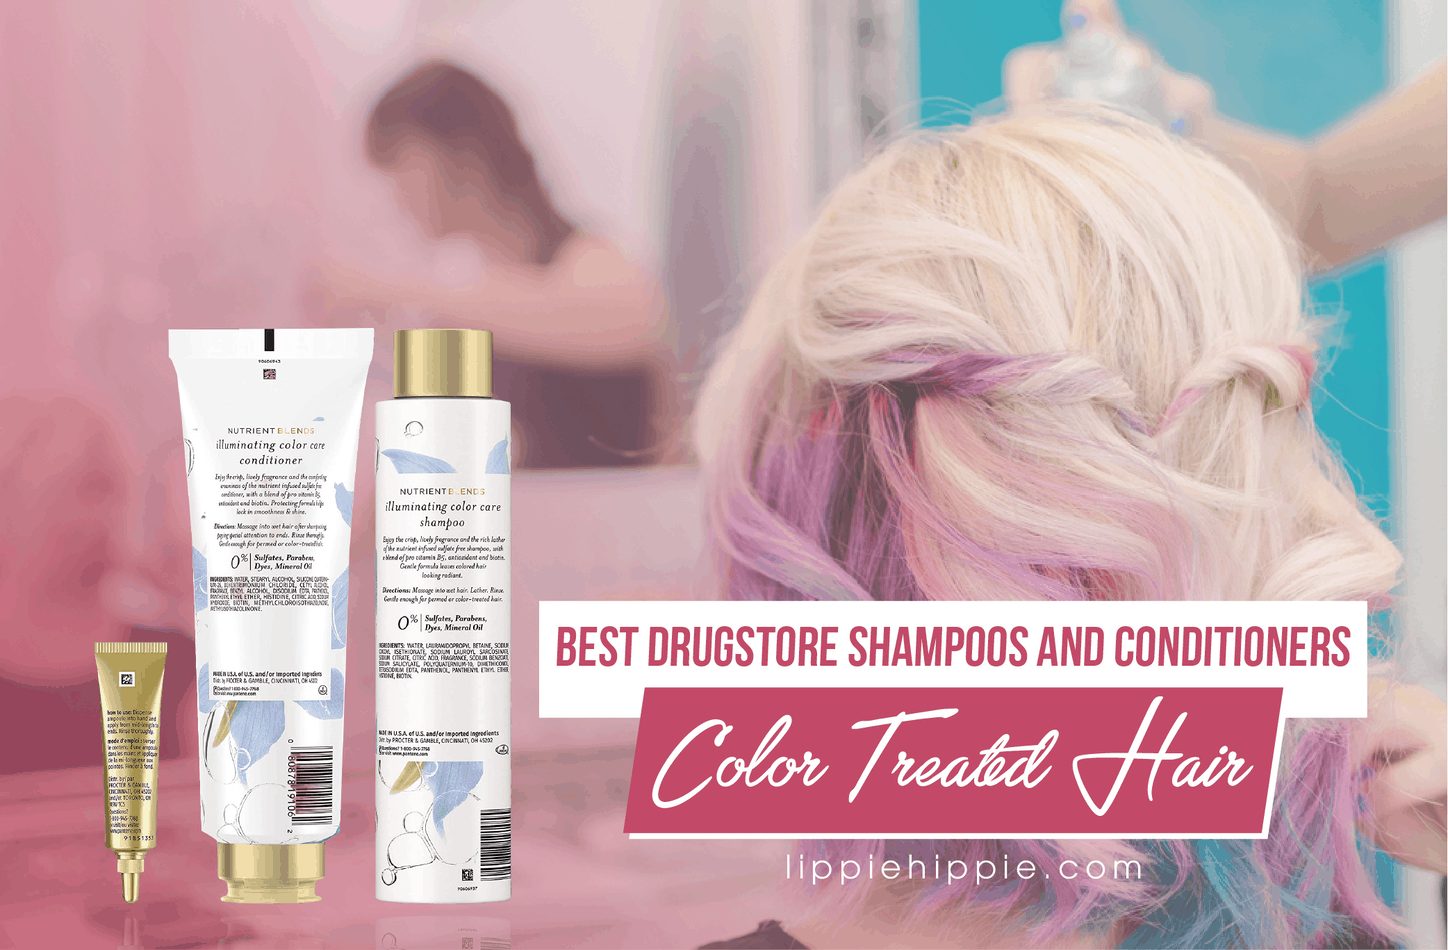 Best Drugstore Shampoos and Conditioners for Color Treated Hair